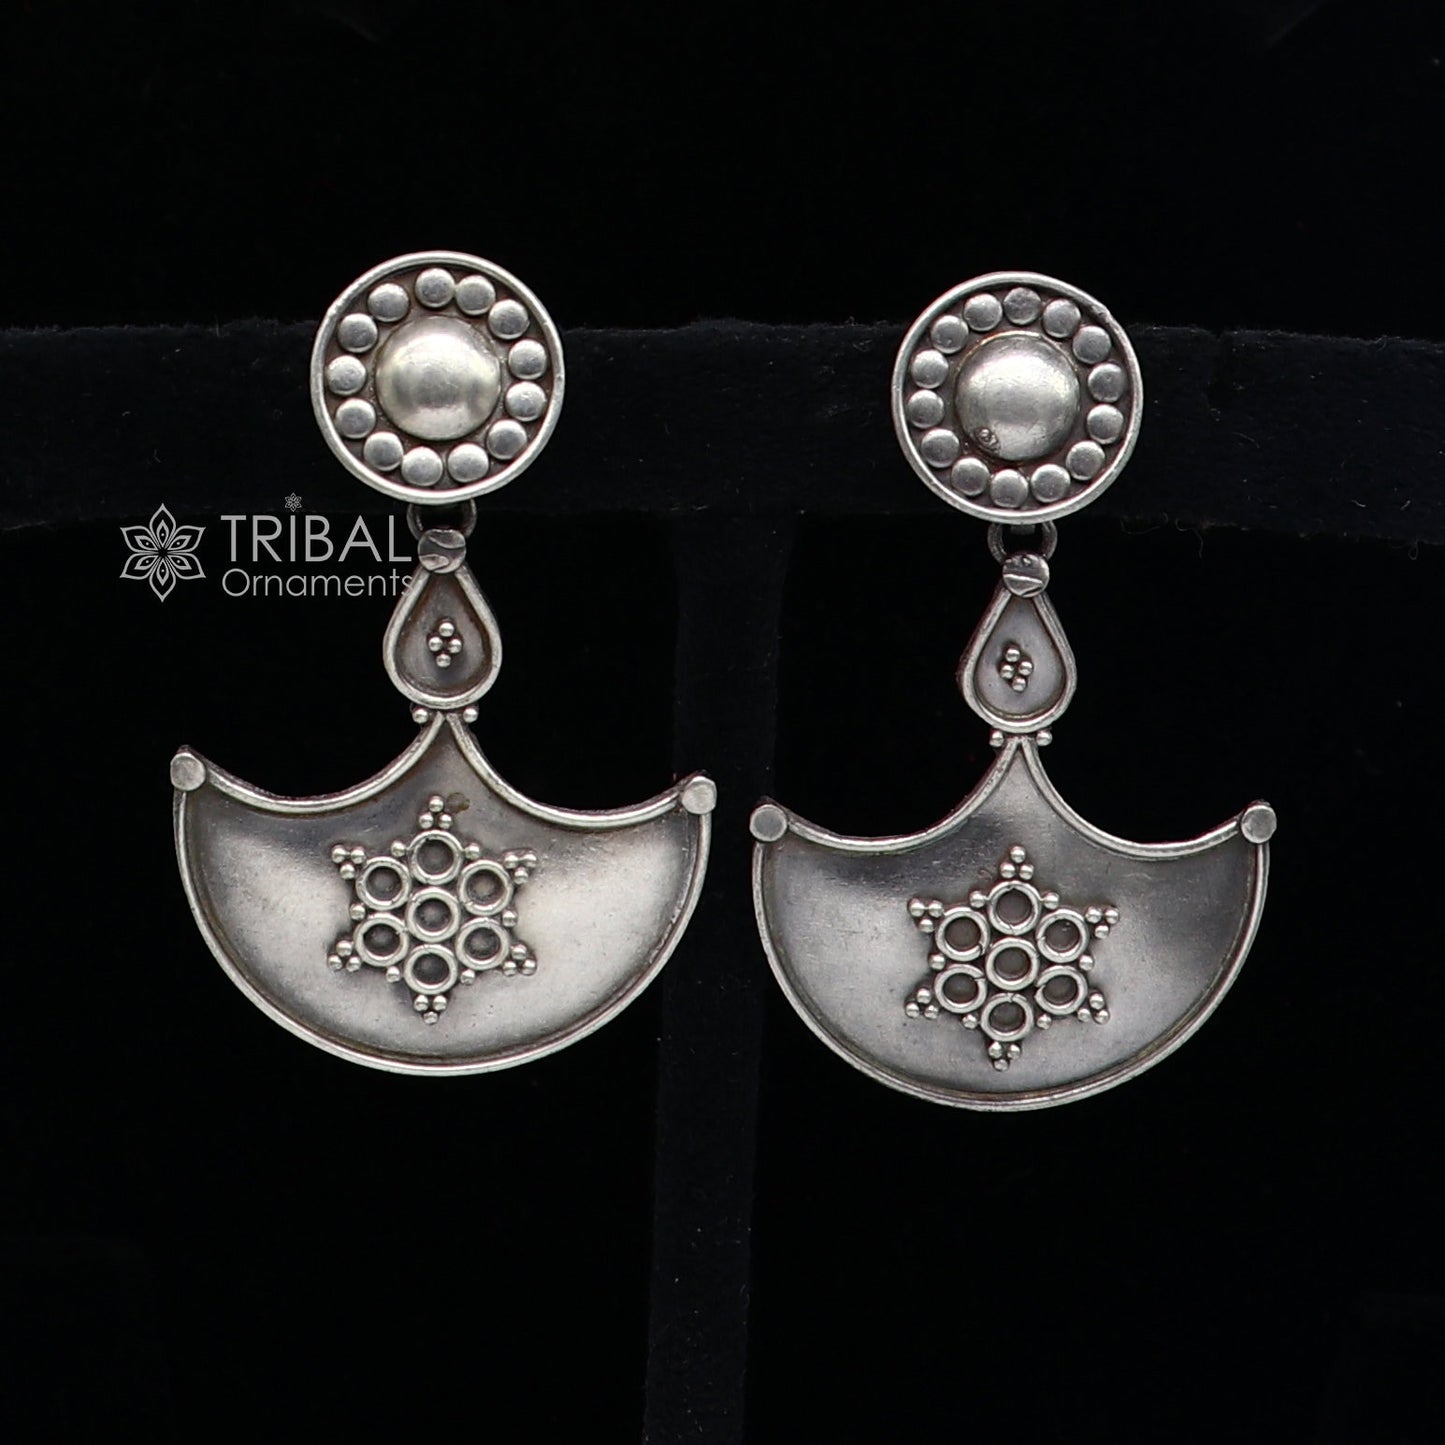 925 Sterling silver handmade traditional cultural design drop dangler fancy earrings, best party functional Navratri jewelry s1240 - TRIBAL ORNAMENTS